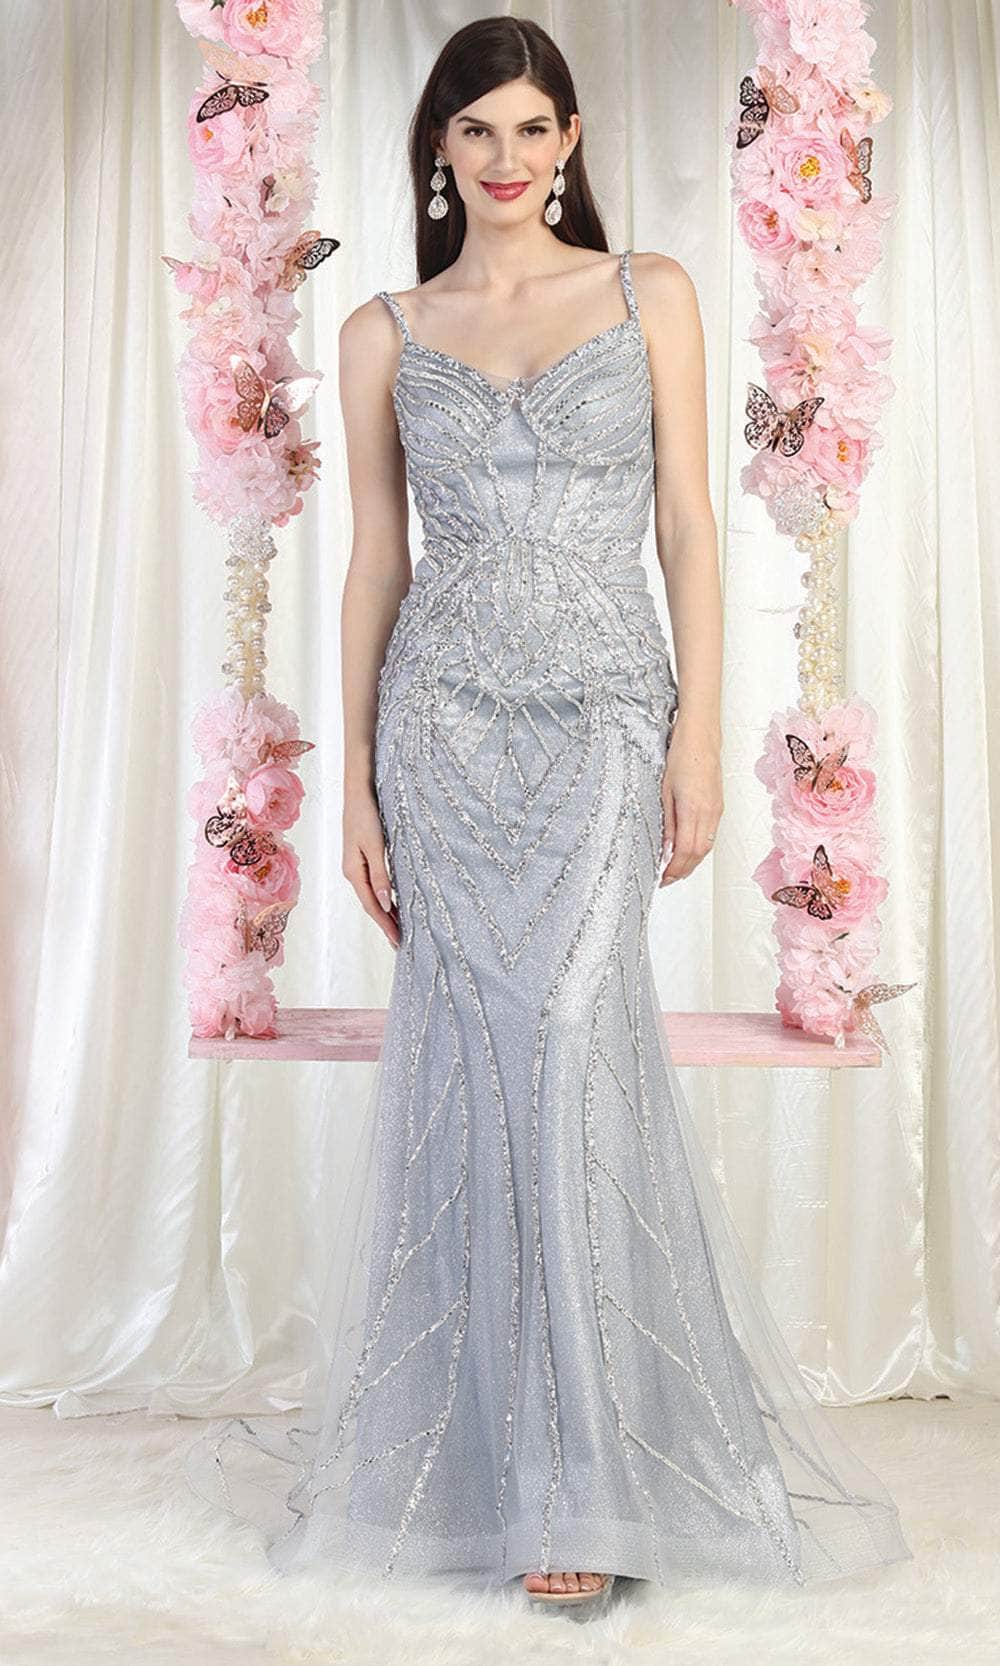 Image of May Queen RQ8023 - Sleeveless Sequined Long Gown